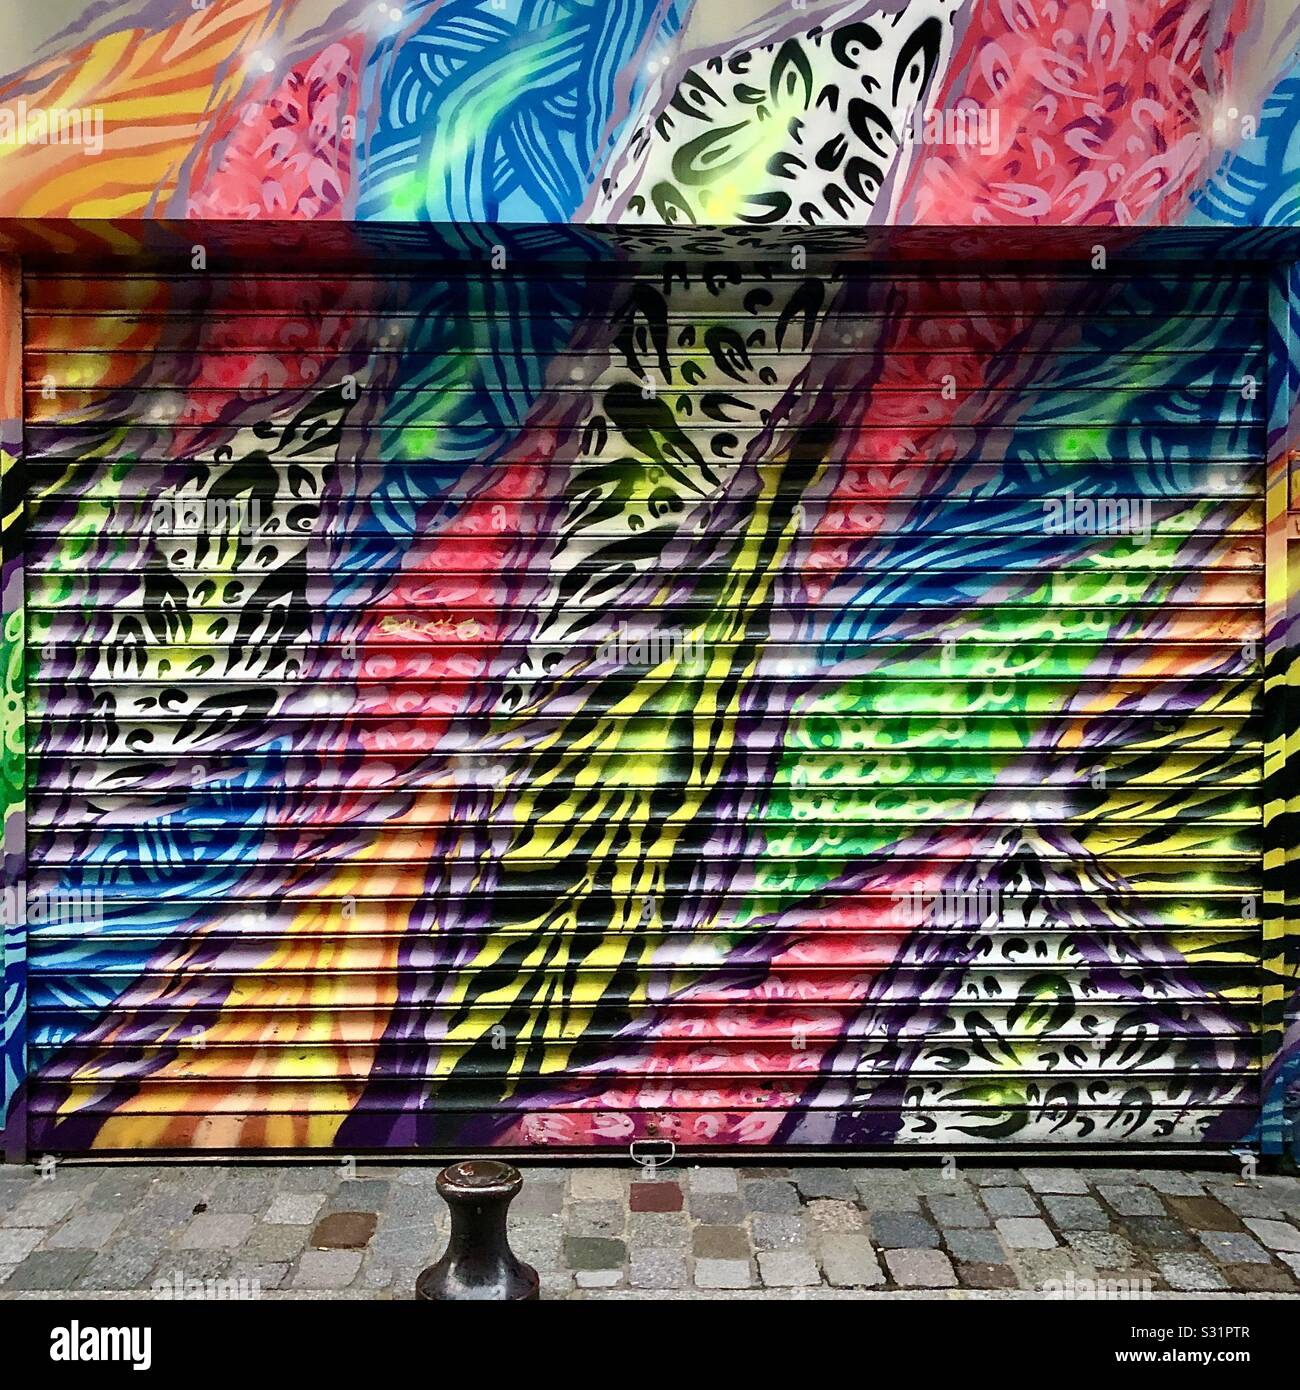 Street art on a closed shop security shutter in the Bastille quarter of Paris, France. Stock Photo